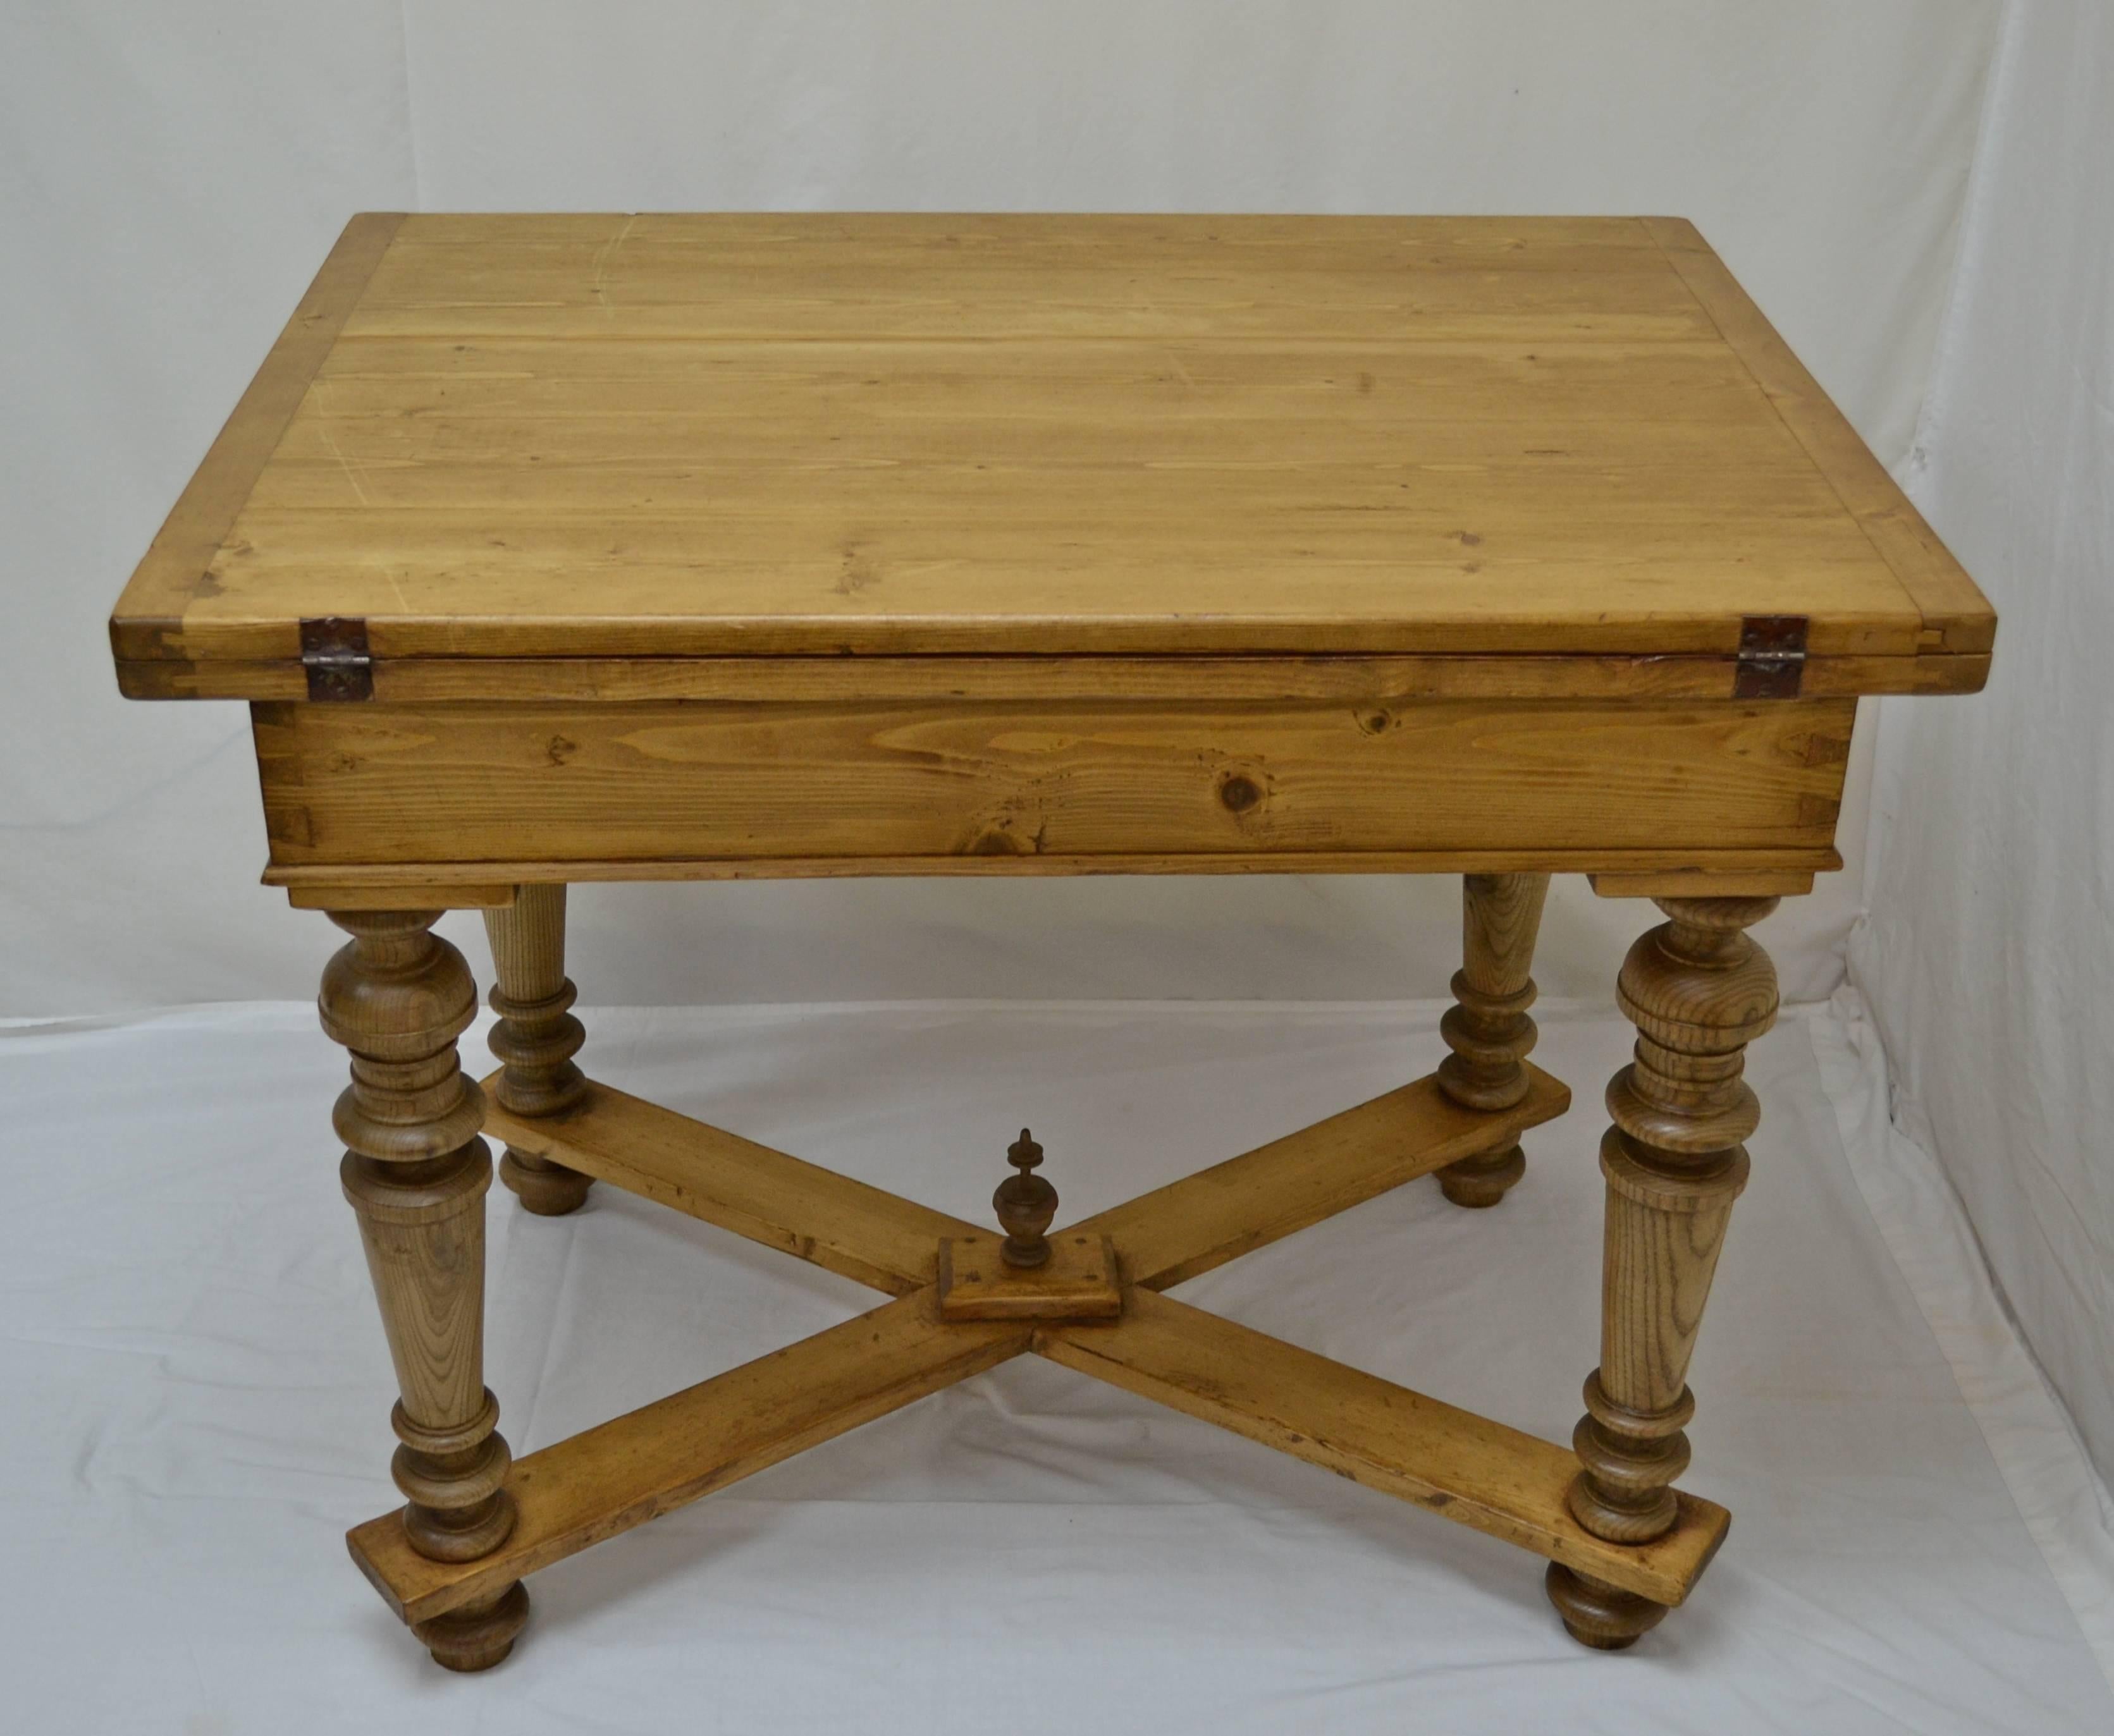 An outstanding pine swivel-top table with elaborately turned pitch pine legs joined by a cross stretcher with a turned hardwood finial at the intersection. Pivot the top through 90 degrees to reveal a deep storage well beneath. Open it on the